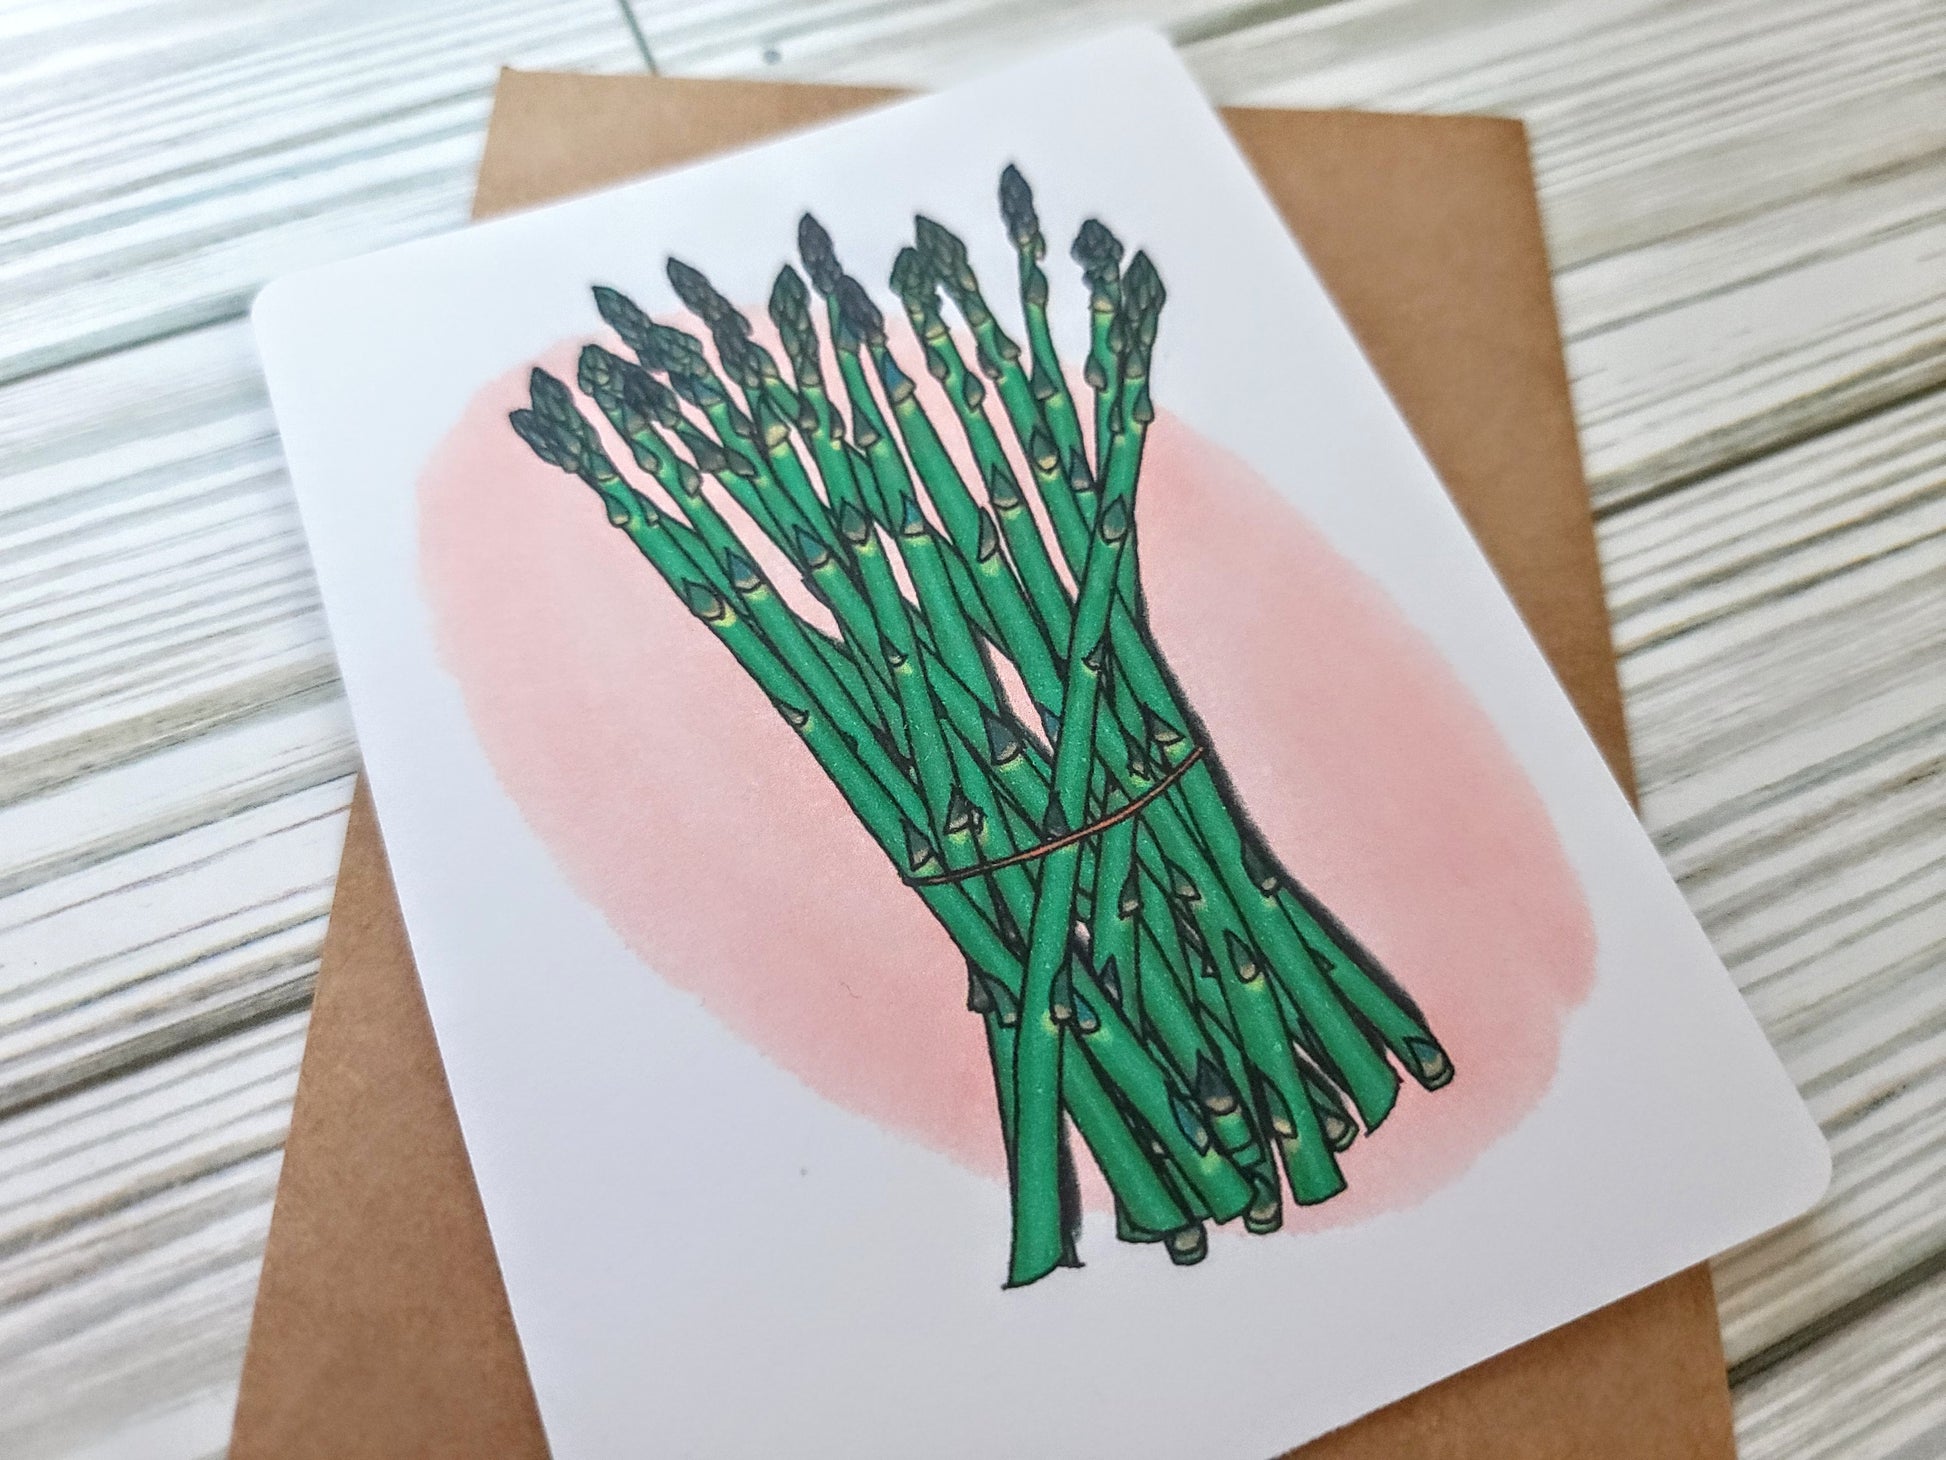 Asparagus Handmade Greeting Card - Recycled Paper and Craft Envelope - Angled Overhead Shot